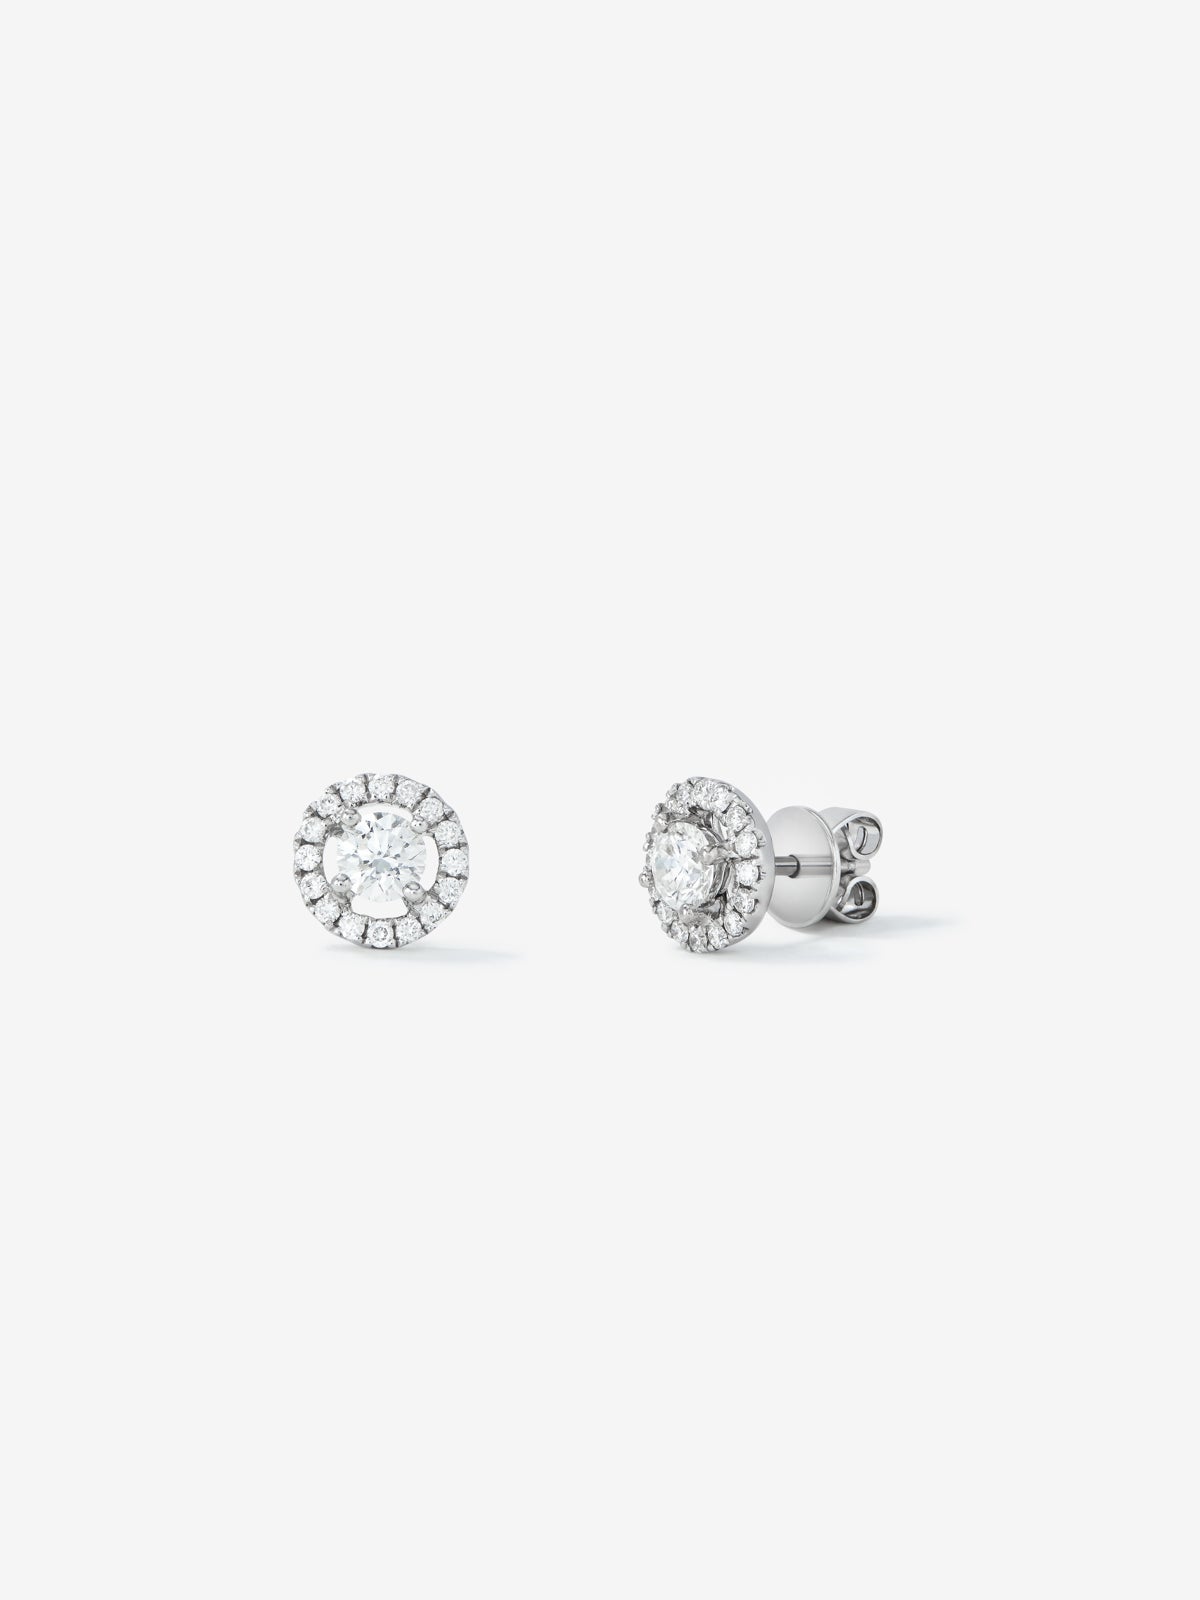 18K white gold earrings with two central brilliant-cut diamonds with a total of 0.4 cts and a border of 30 brilliant-cut diamonds of 0.18 cts